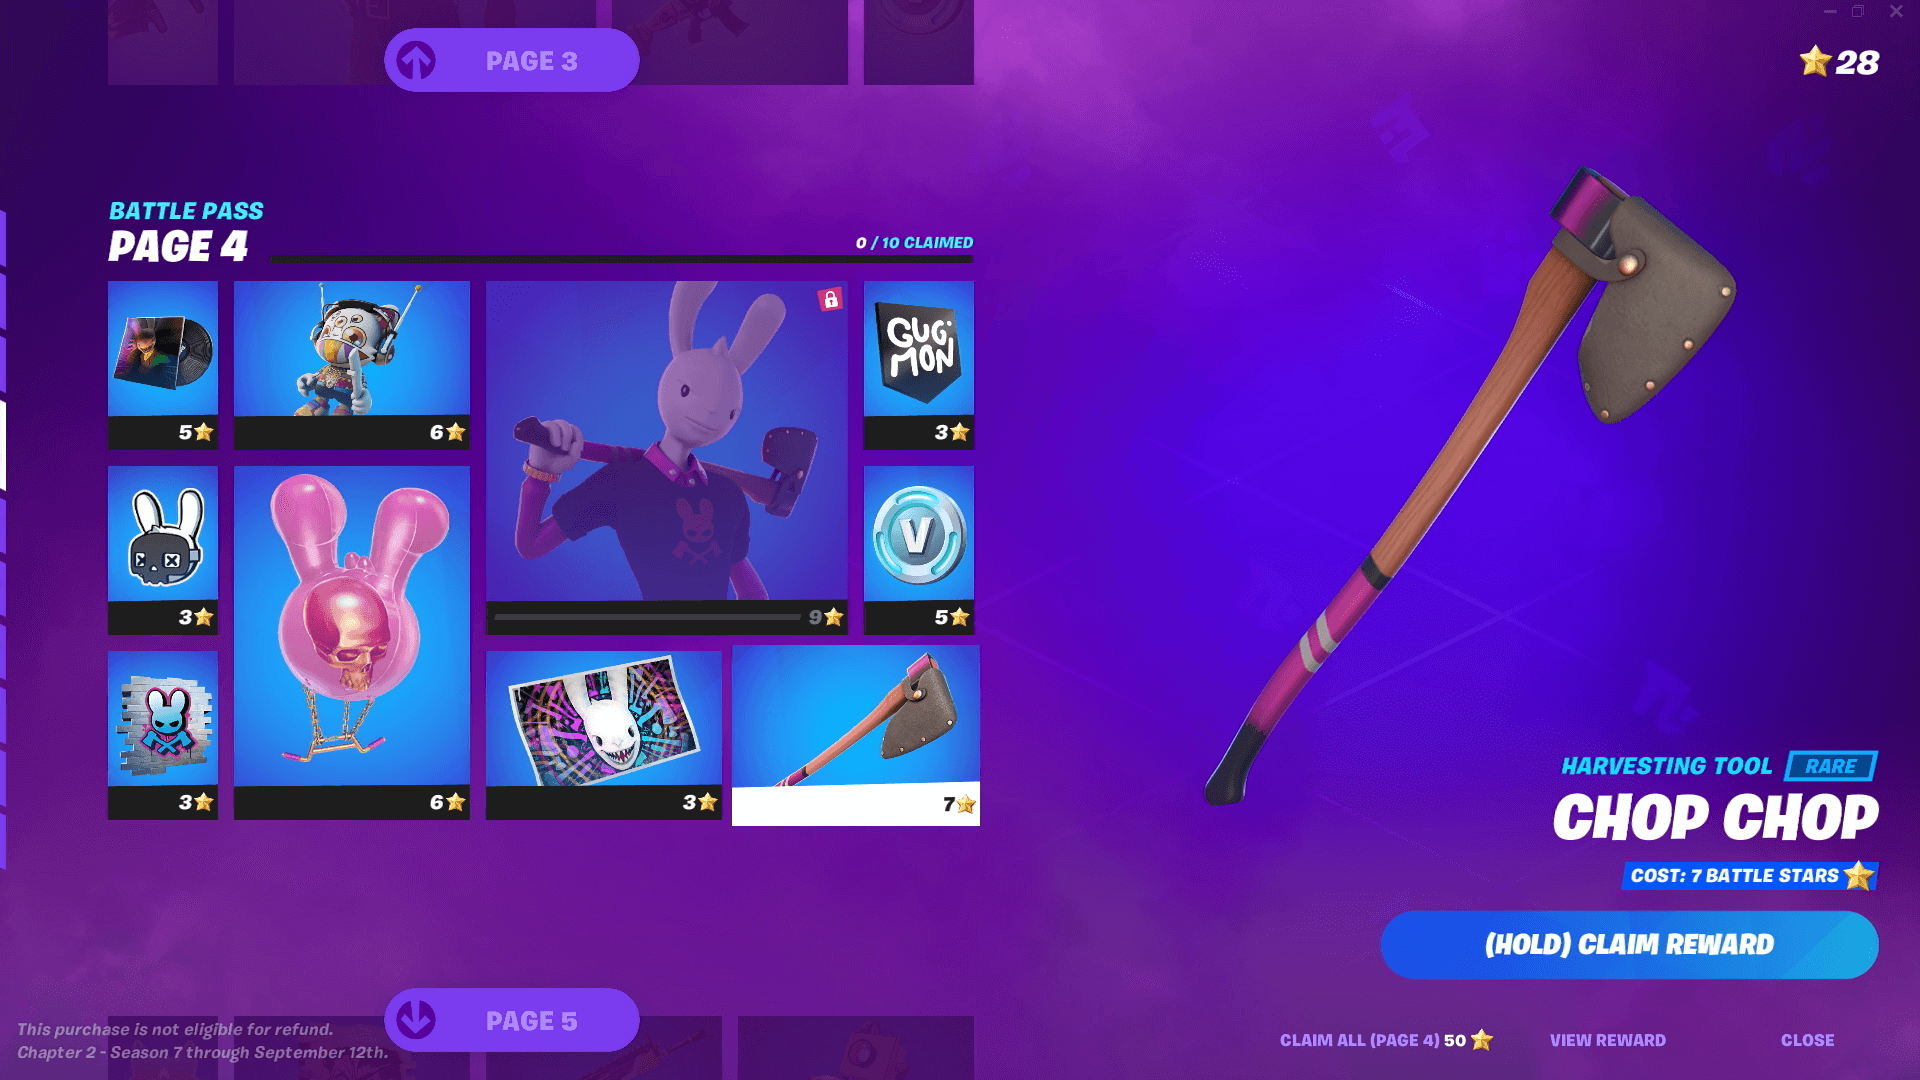 Fortnite Season 7 Allows You To Choose Battle Pass Rewards With Battle